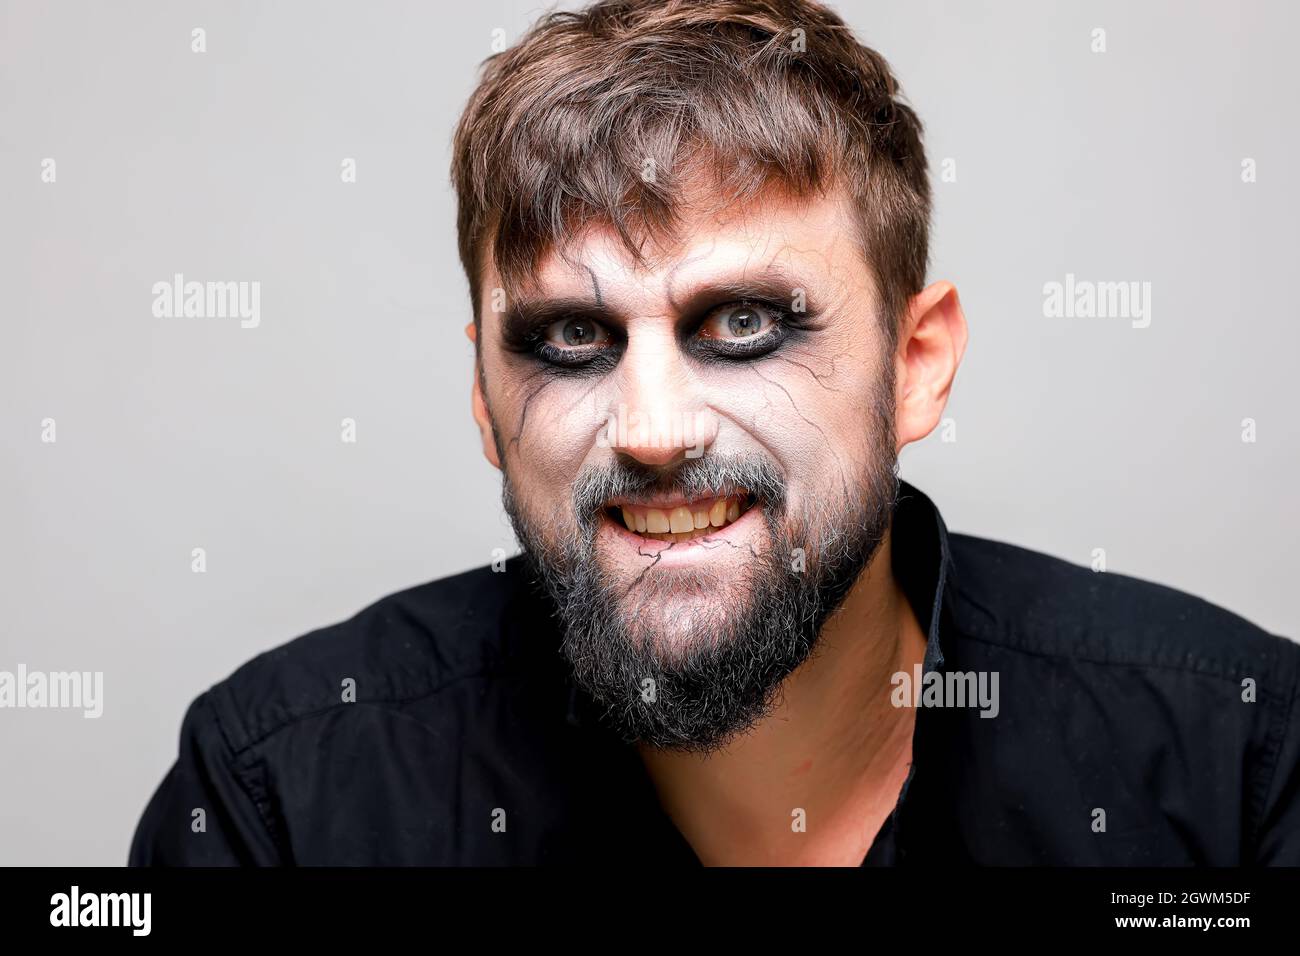 a man with undead-style makeup laughs and shows his teeth Stock Photo